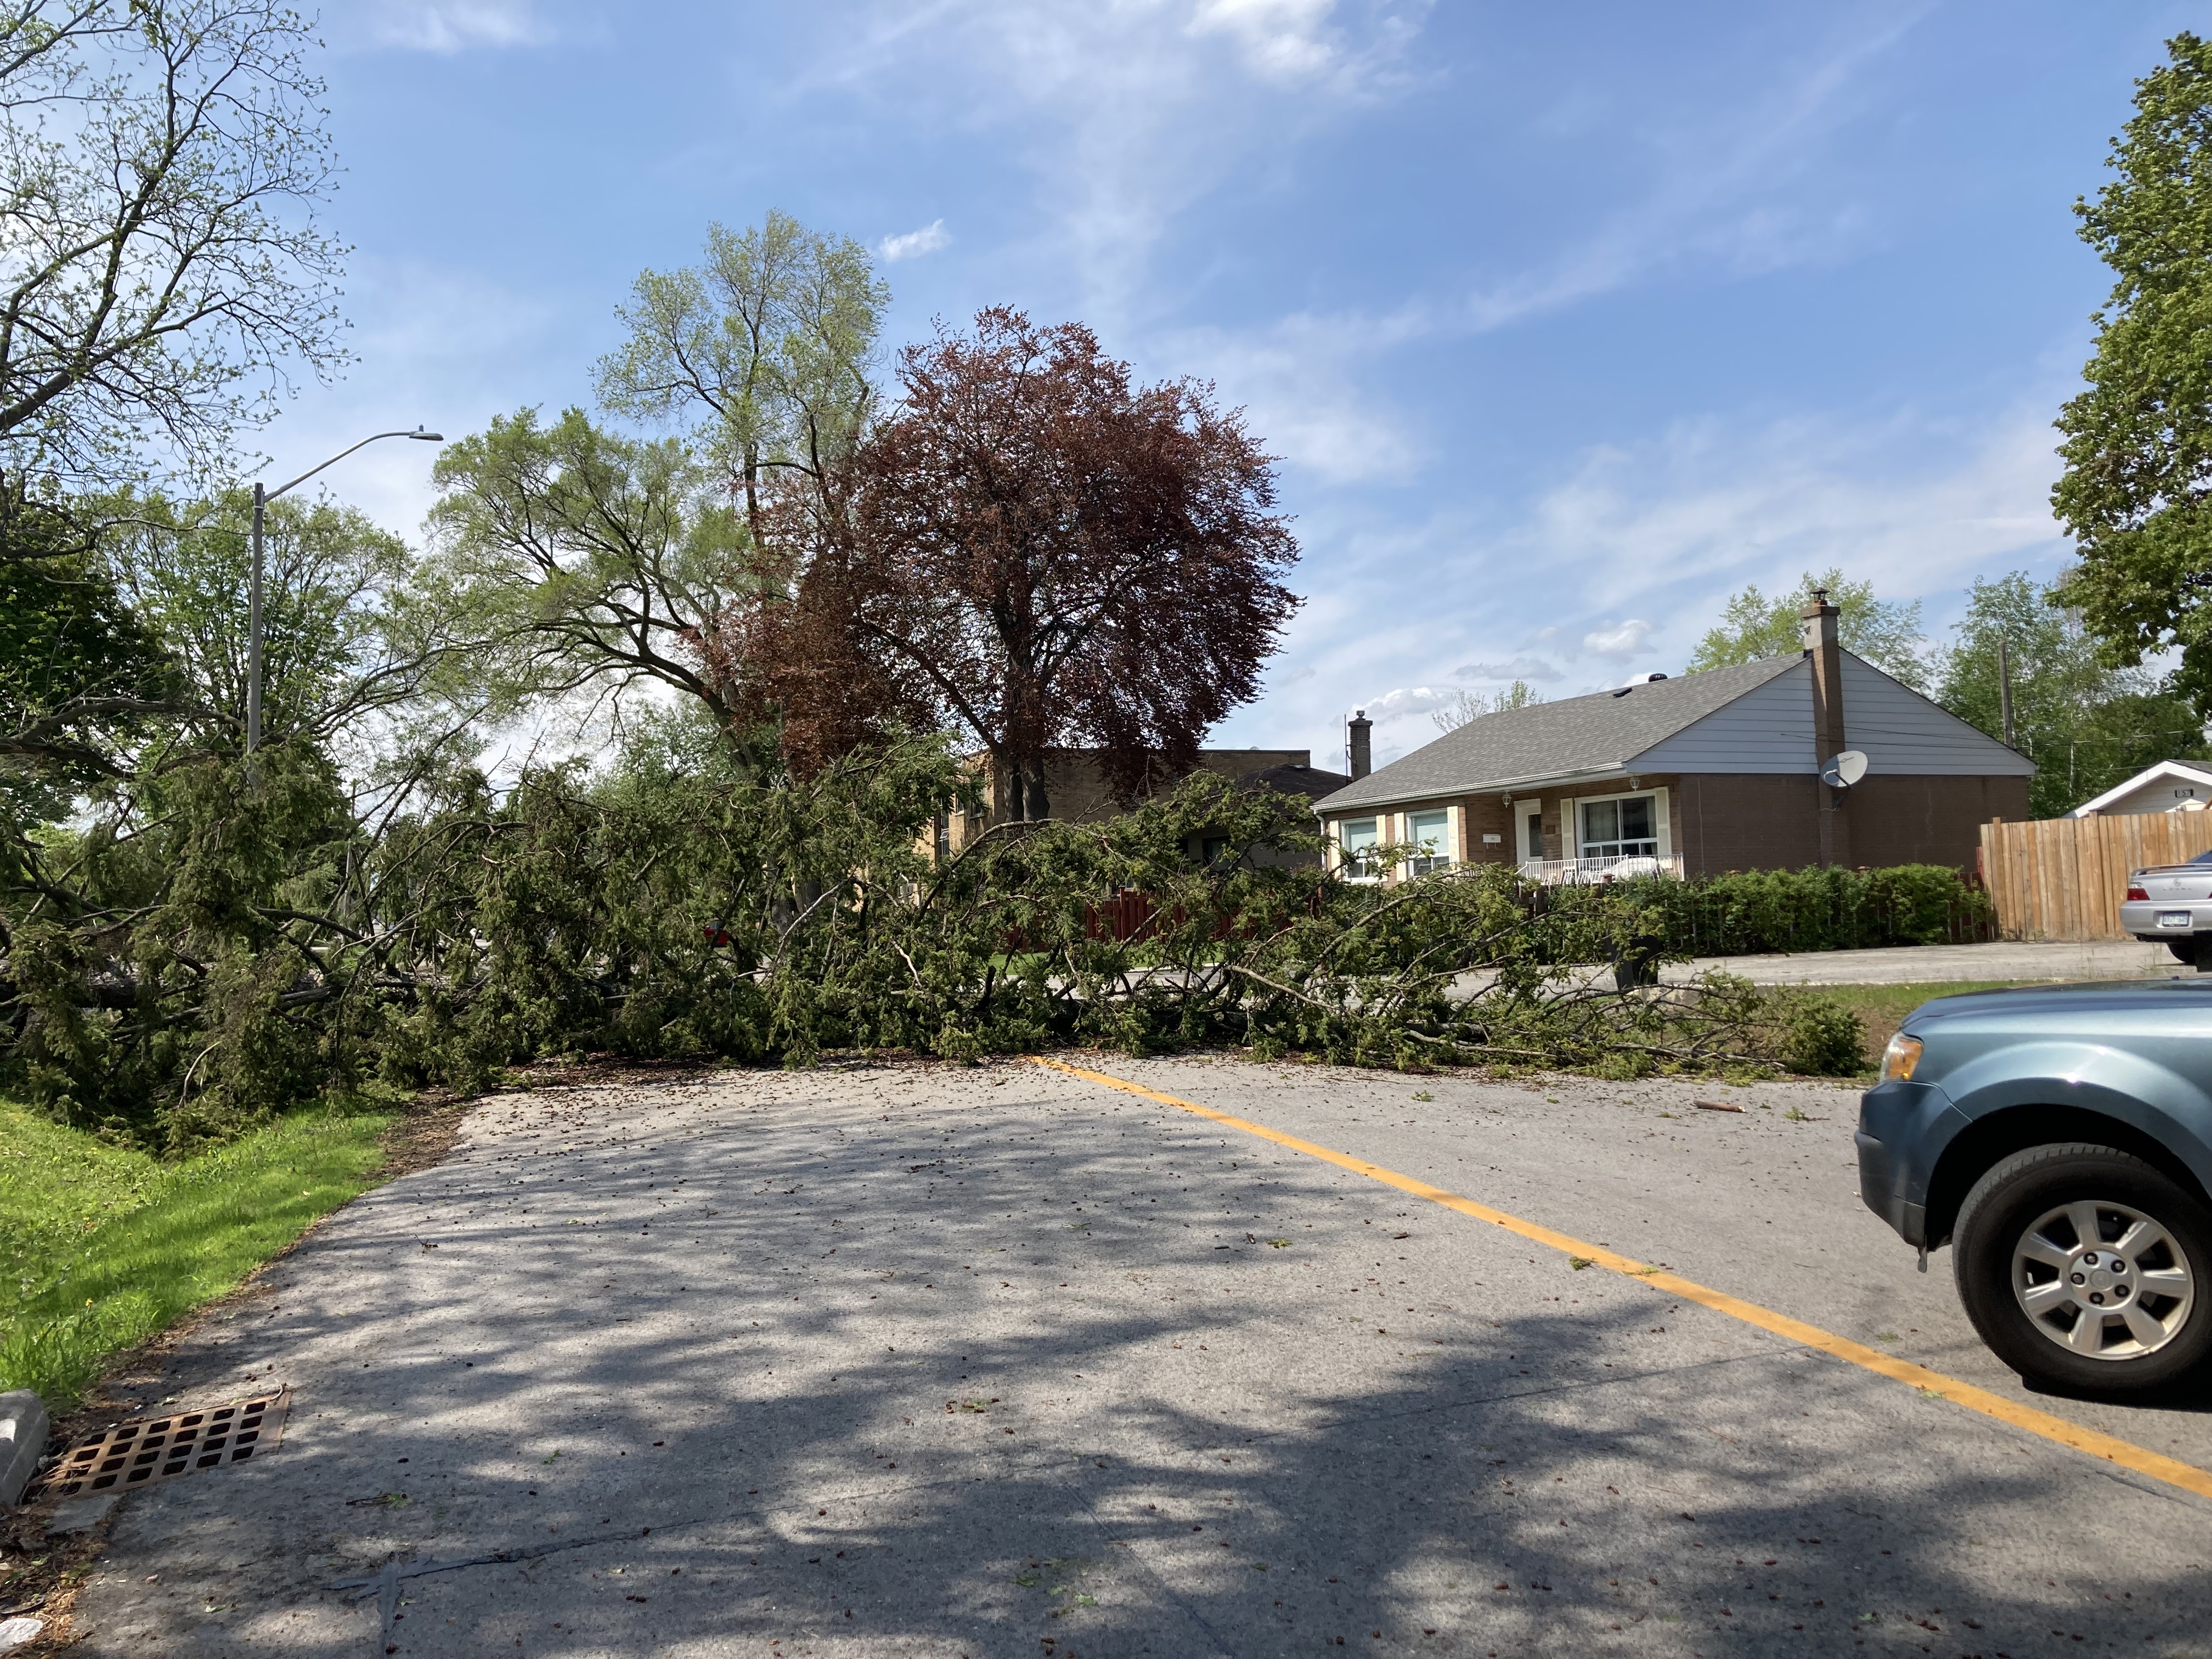 A downed tree closes off Maurice just north of Rebecca Street on May 21, 2022 | Oakville News N.M.